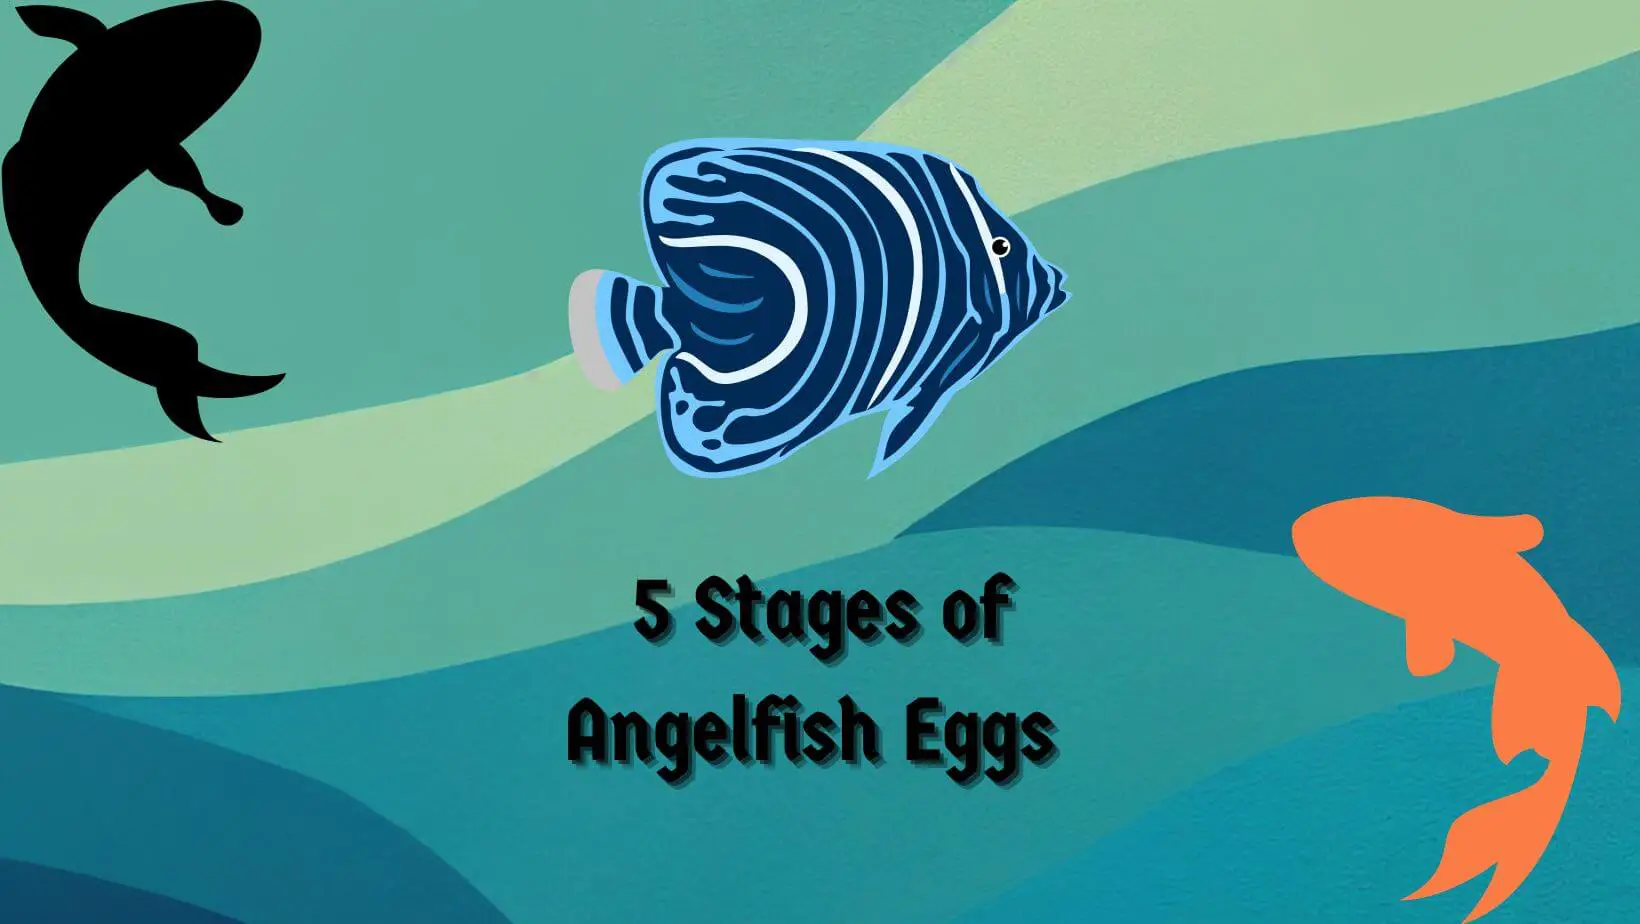 5 Stages of Angelfish Eggs